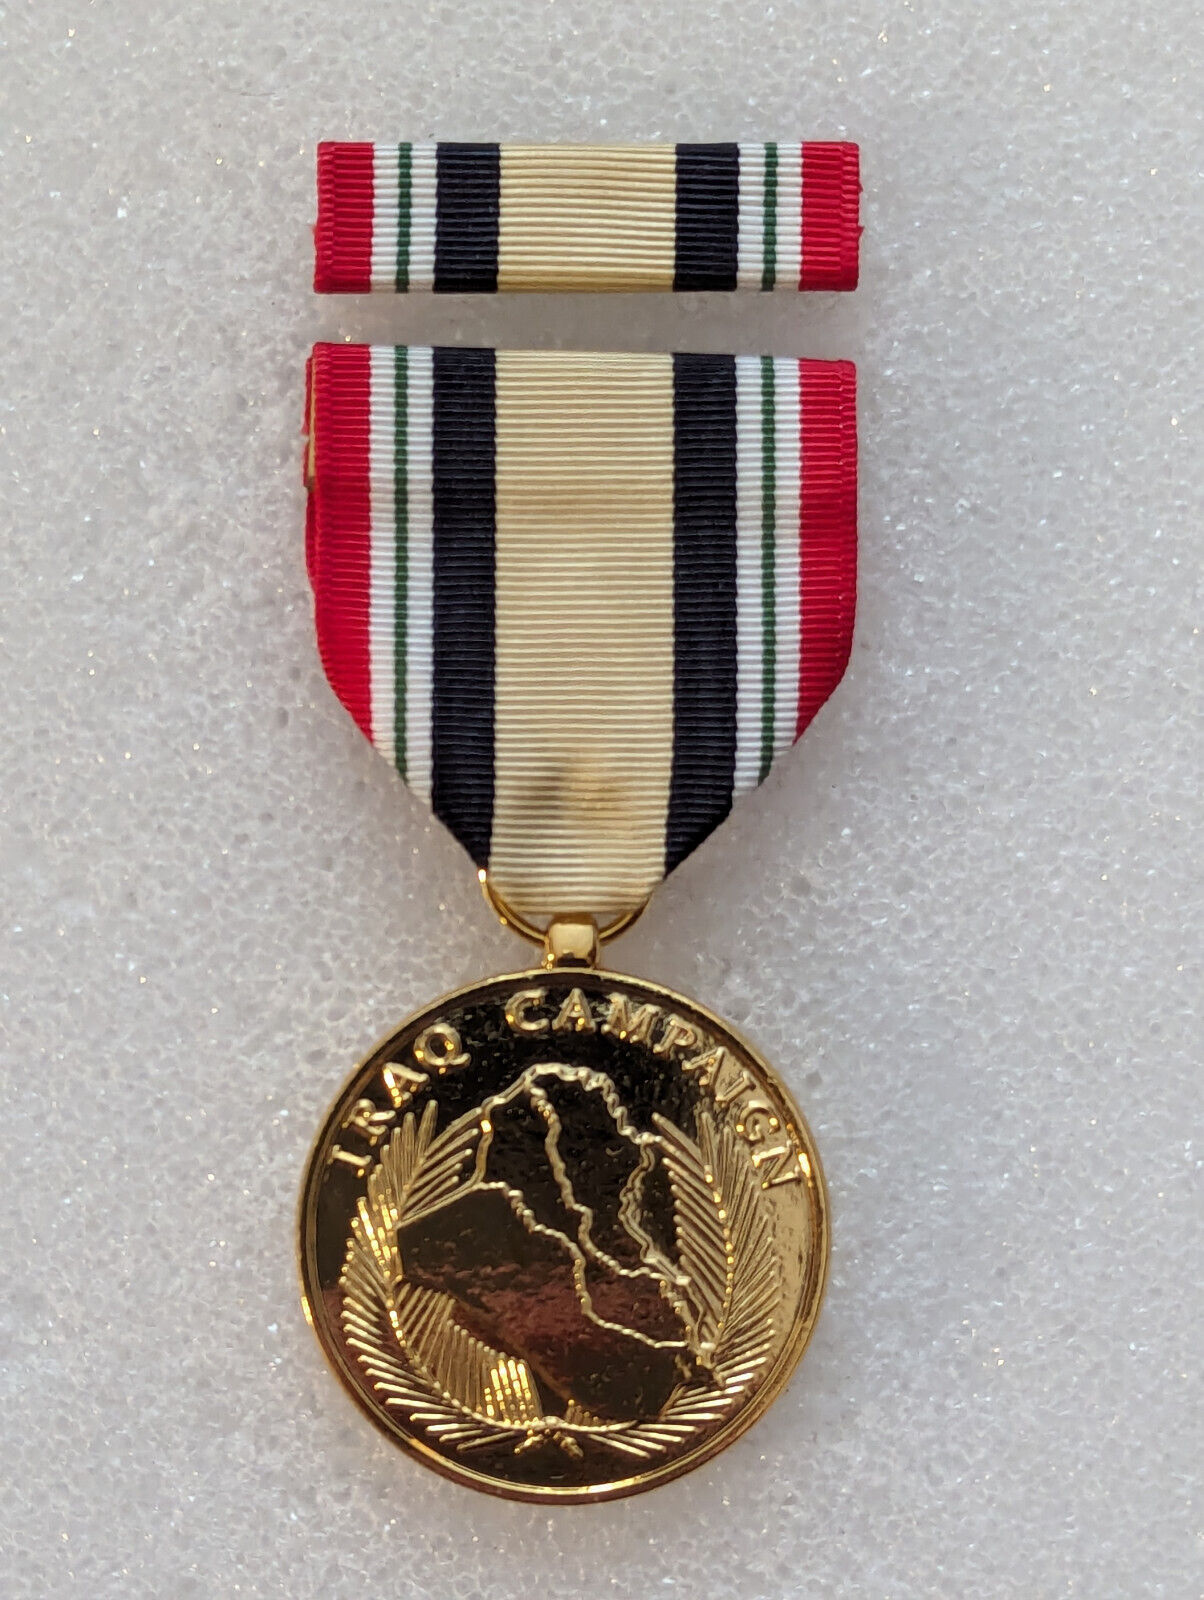 Iraq Campaign Medal. Reproduction